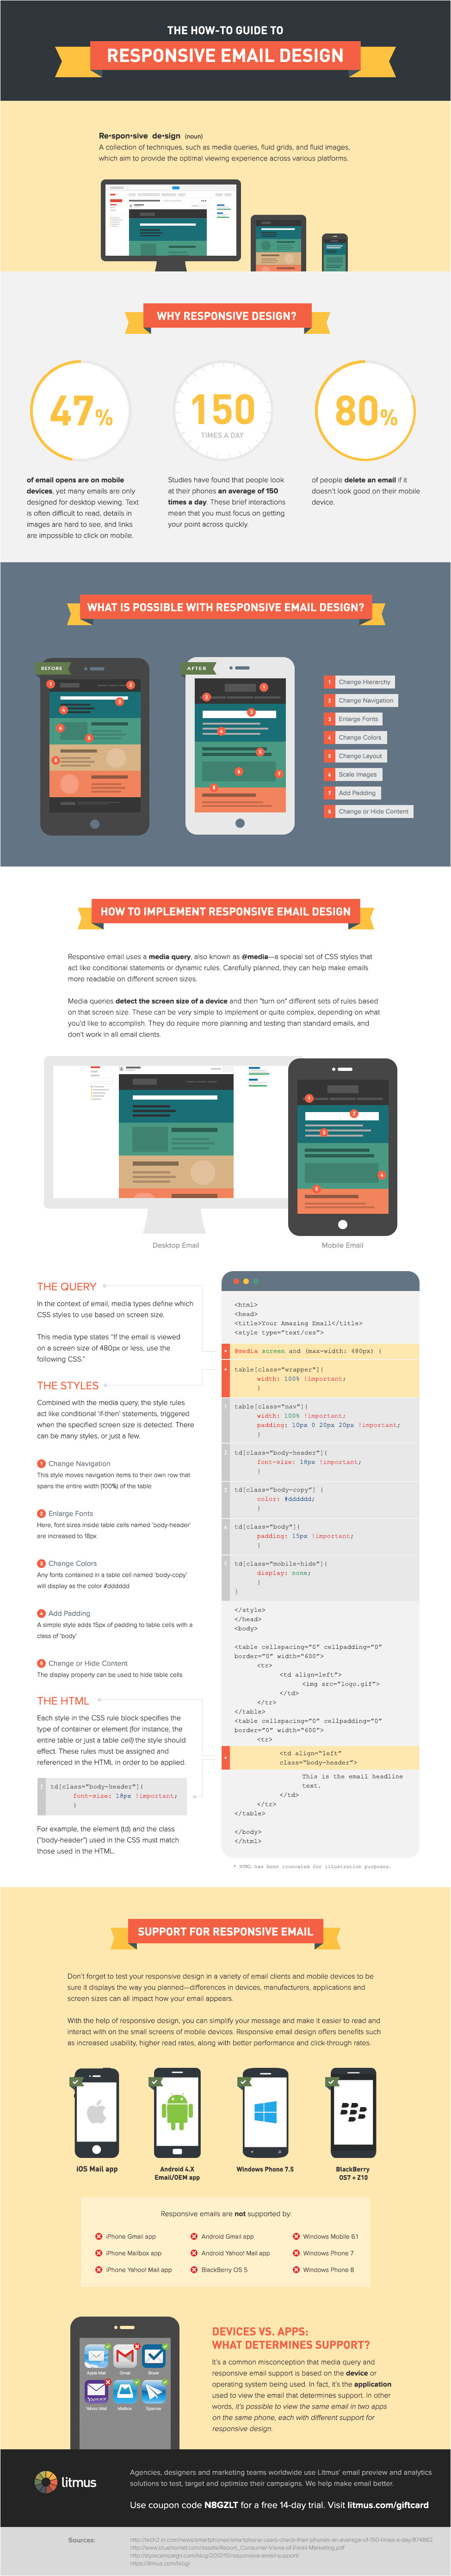 responsive email design infographic